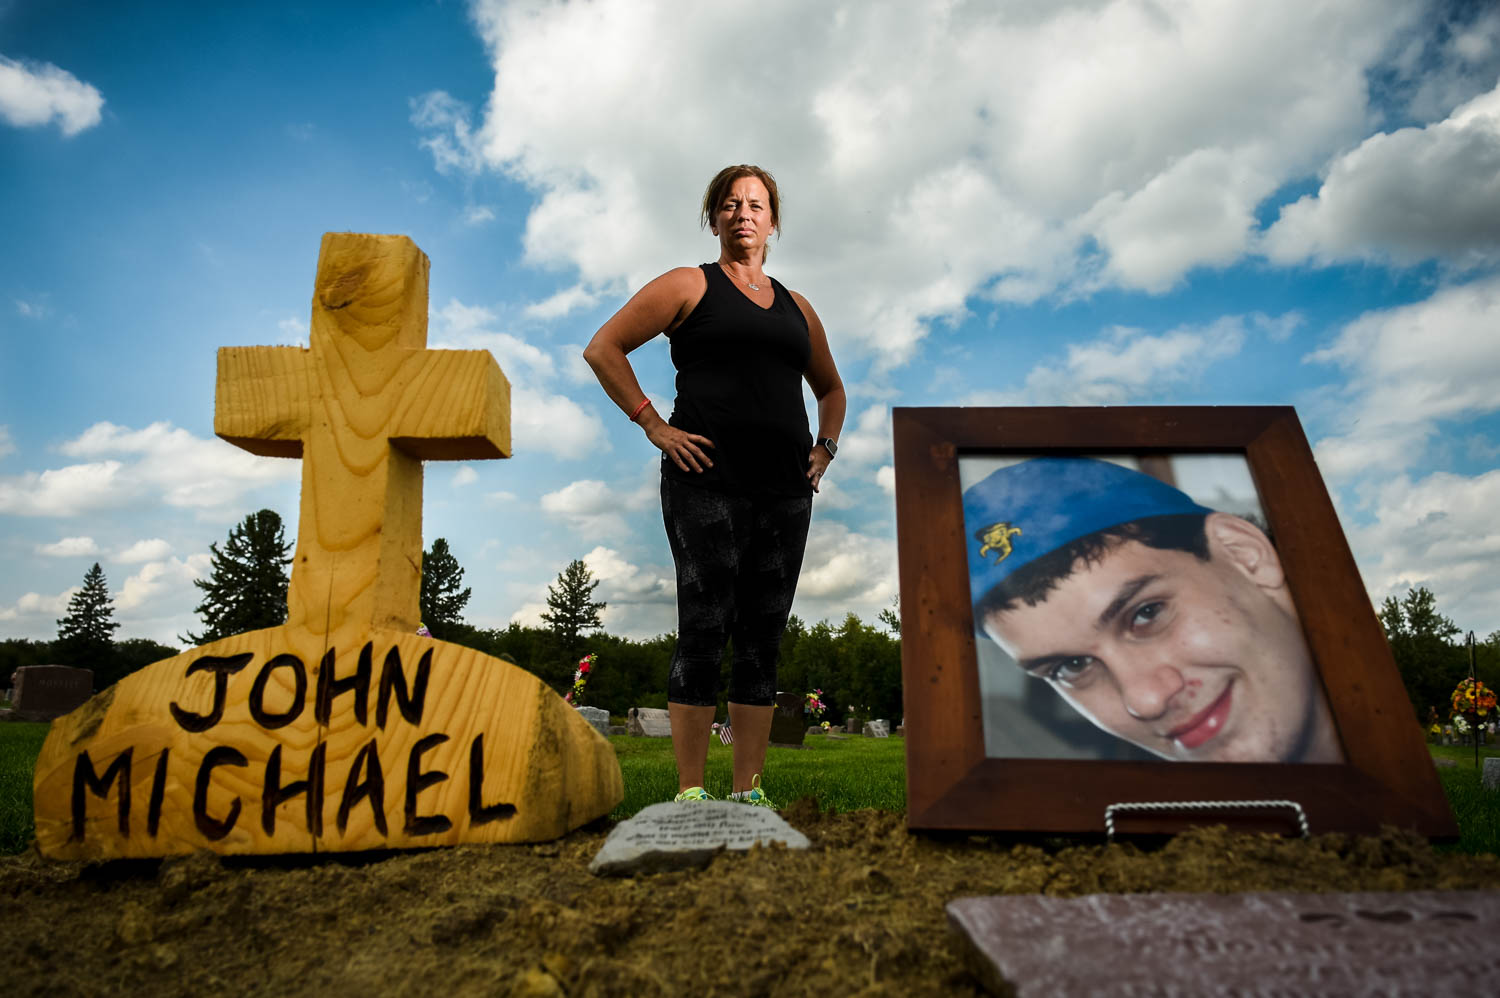 Gina Young, of Viola, has been training for months to run the Quad Cities Marathon's half-marathon in the cemetery where her son, John-Michael Perry, is buried. The 20-year-old died Aug. 3, 2016, after falling out of a moving car while leaving the Mississippi Valley Fair in Davenport with friends. The grieving mother says she is running the race to honor her late son and help heal her pain. To see my video story about Gina go to my Multimedia page.  